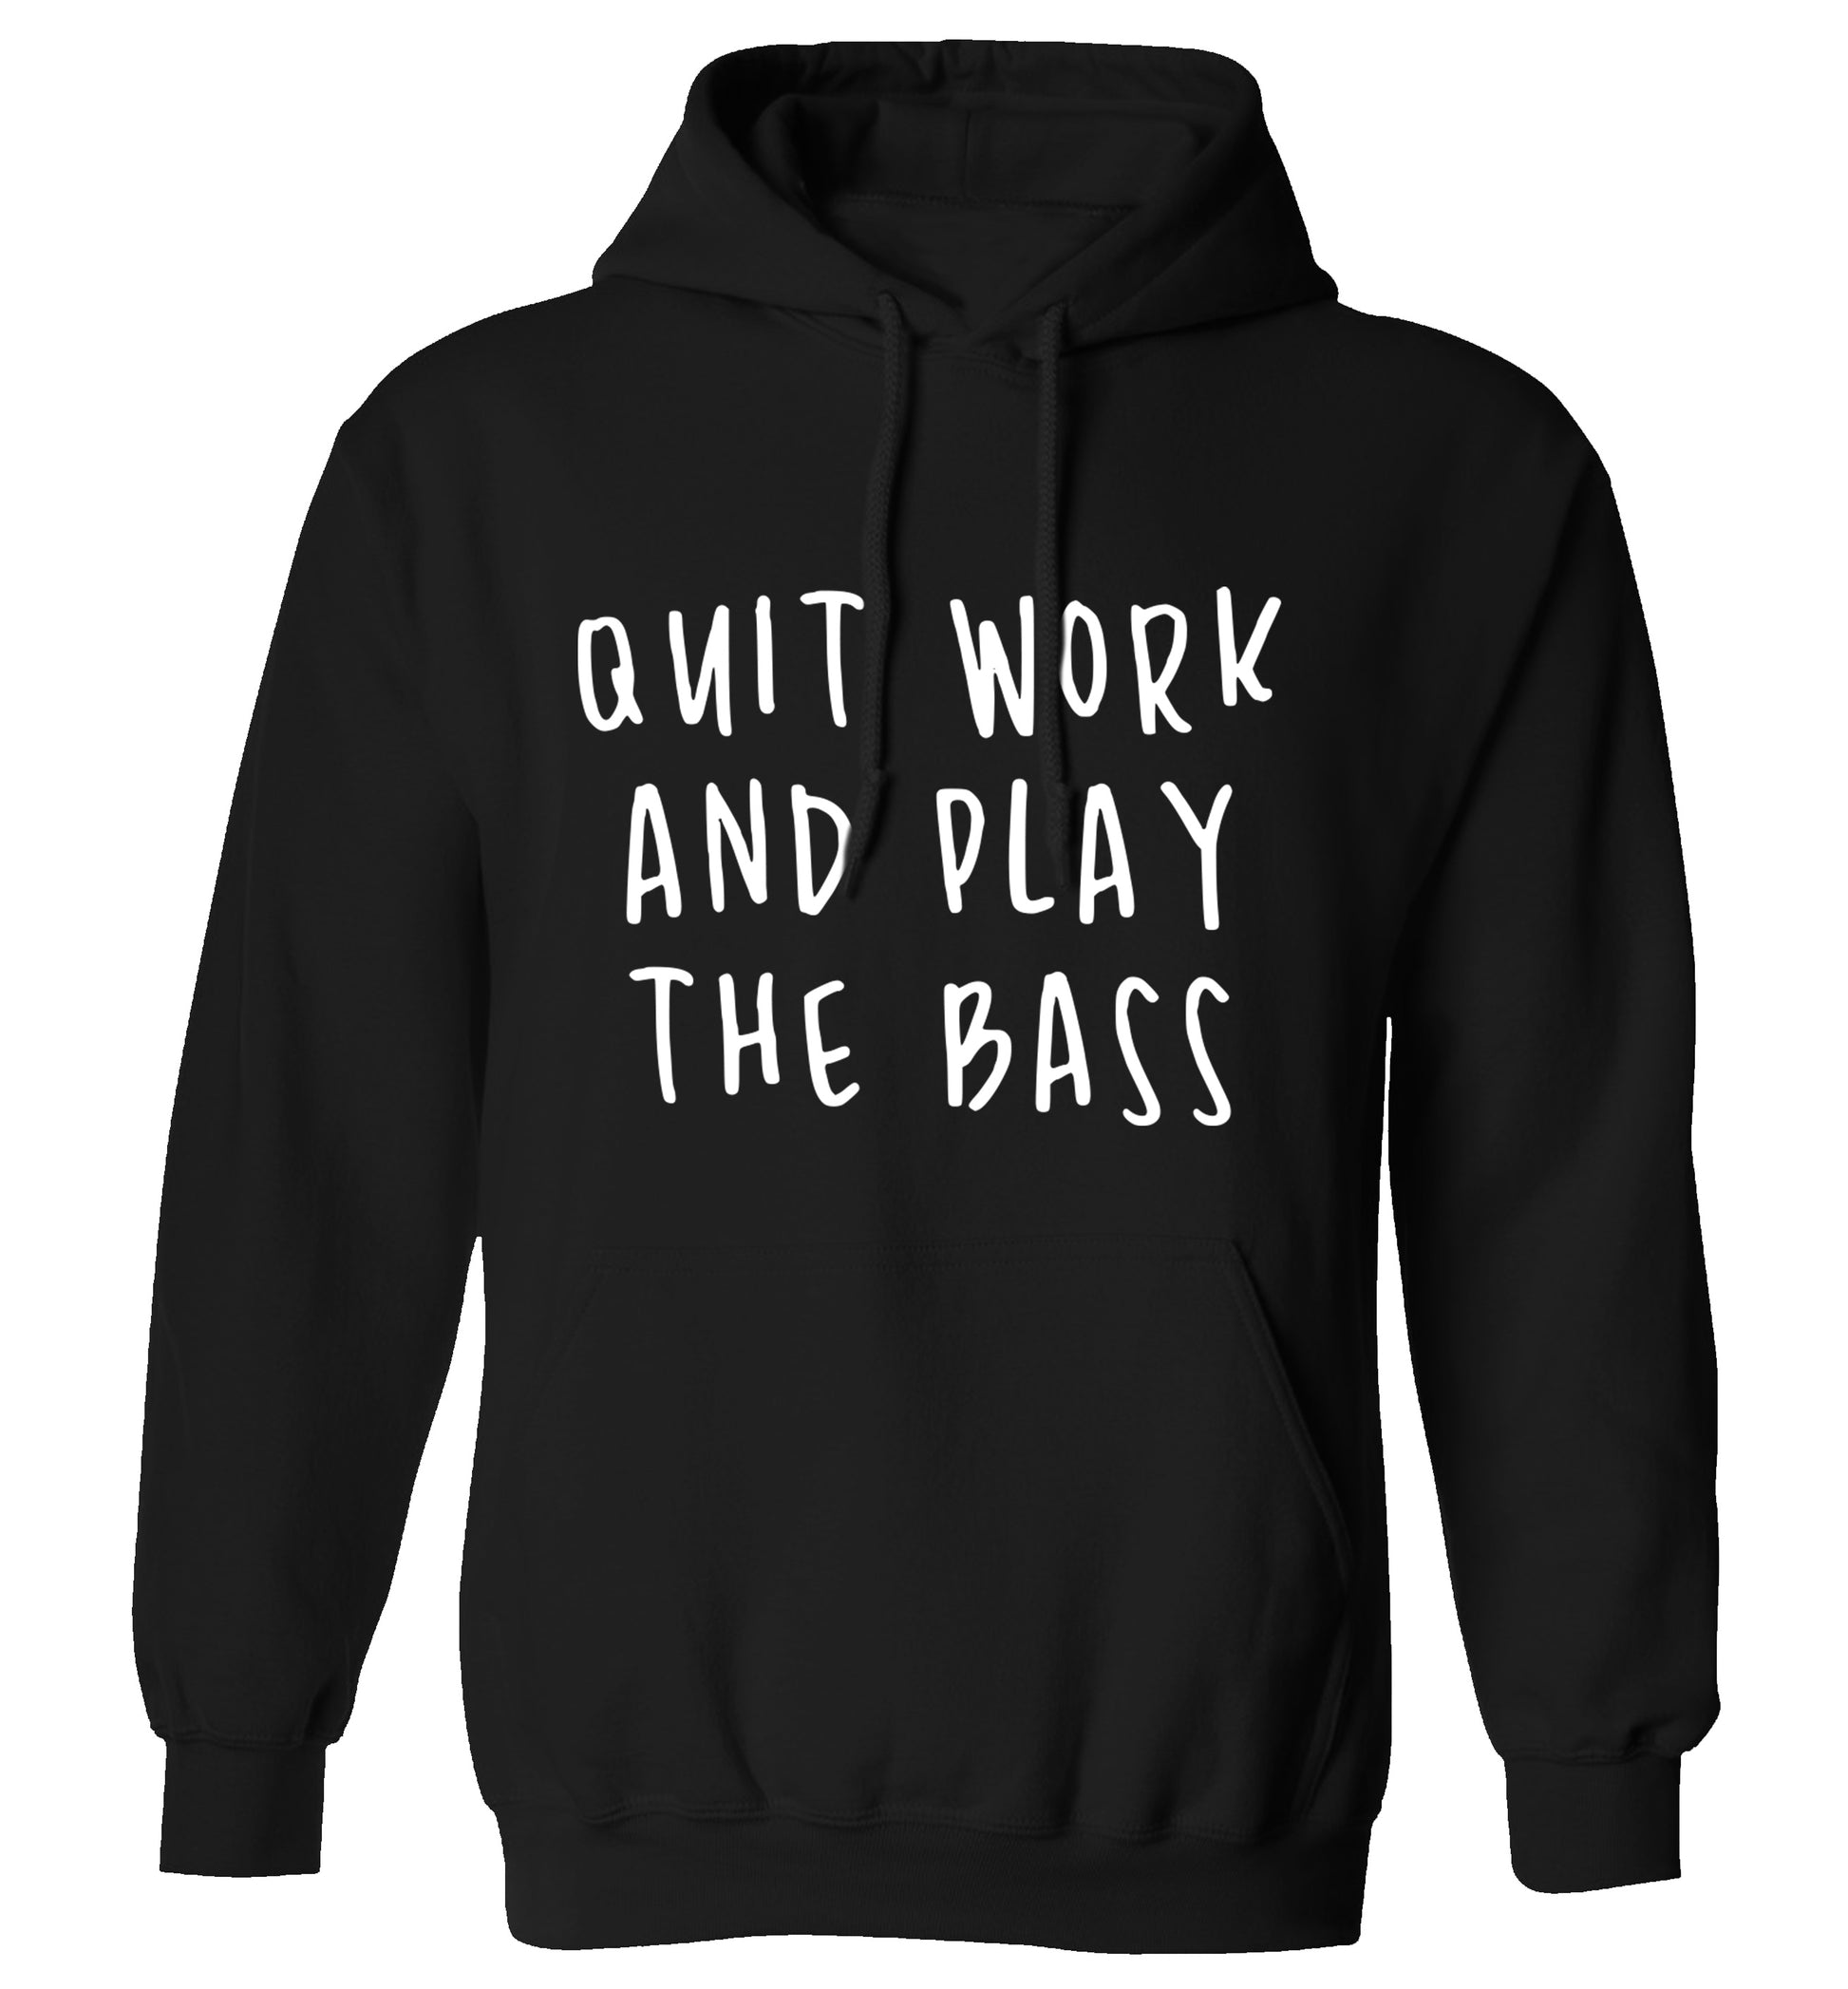 Quit work and play the bass adults unisex black hoodie 2XL